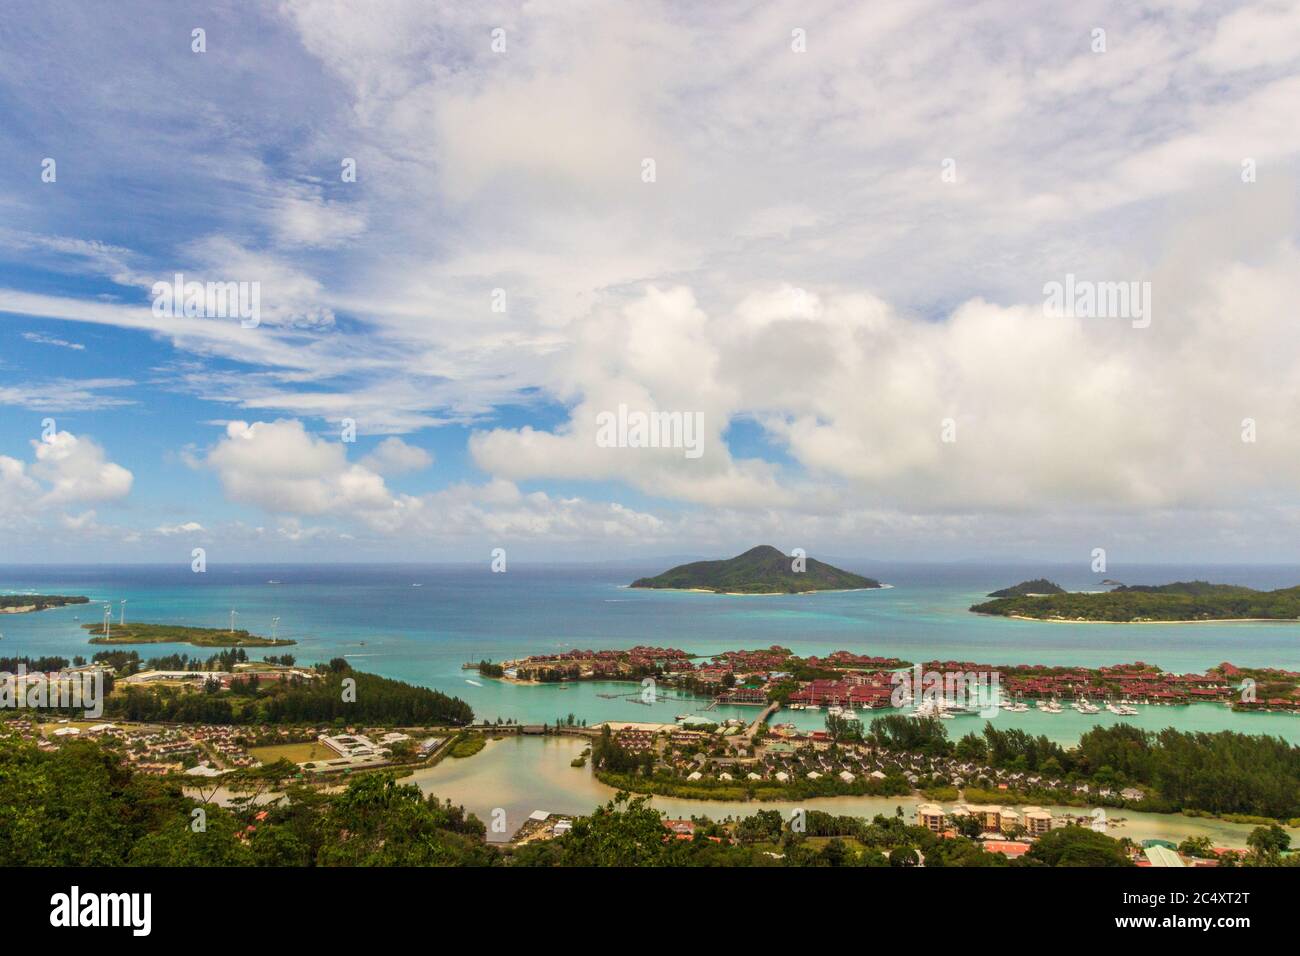 Beautiful view of Seychelles on a cloudy warm day. Concept of tourist islands. Stock Photo